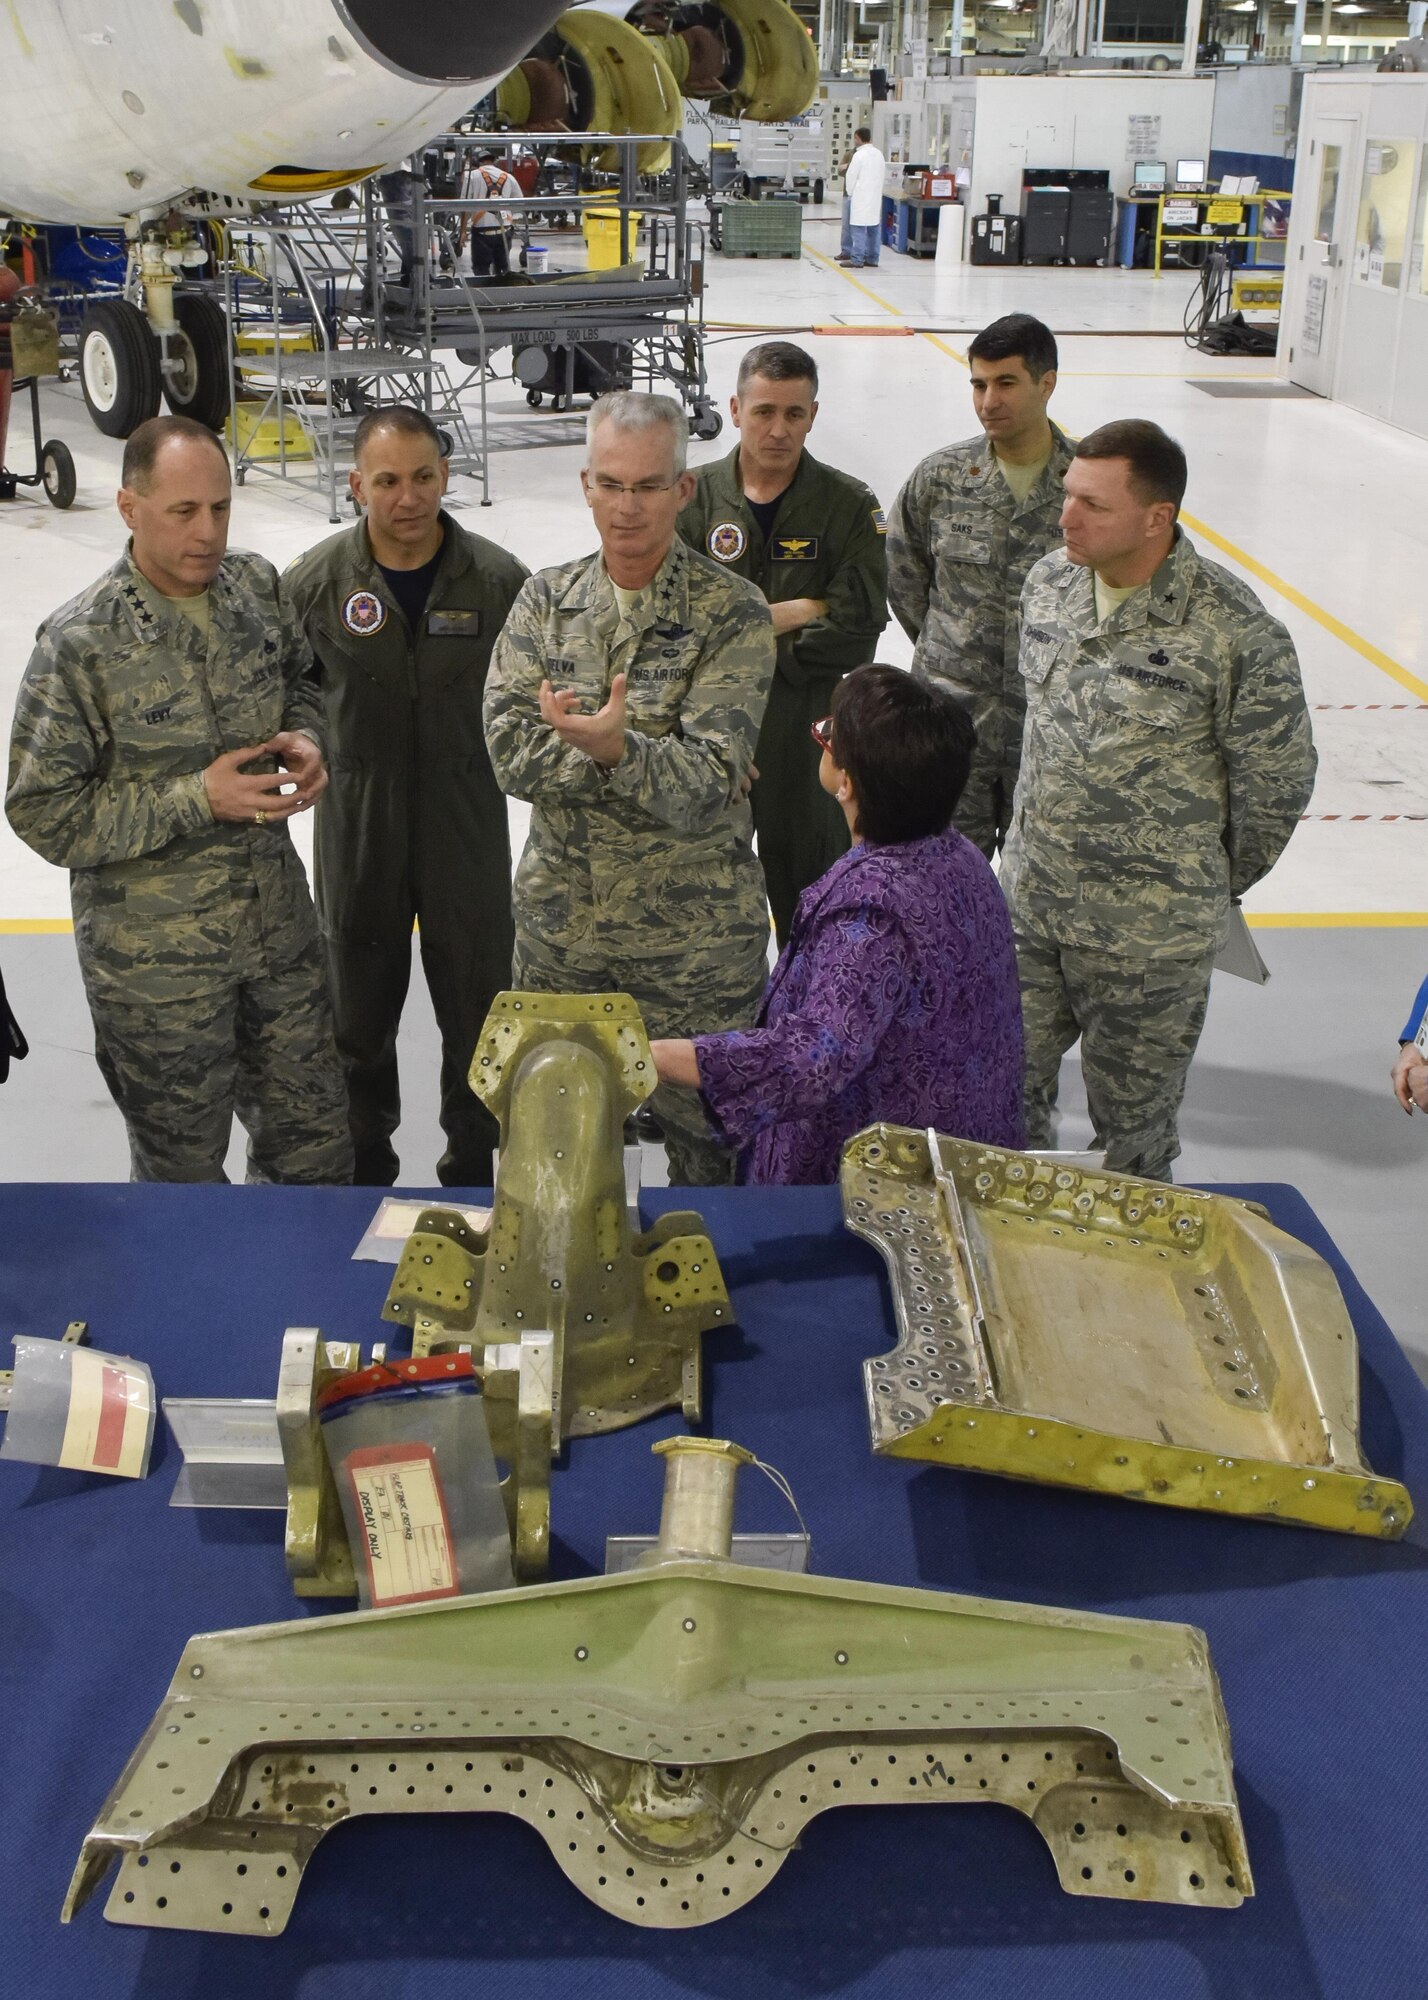 Gen. Paul J. Selva, the vice chairman of the Joint Chiefs of Staff, center foreground, receives a briefing by Theresa Farris, the 564th Aircraft Maintenance Squadron director, on how the Oklahoma City Air Logistics Complex supports the nuclear mission to include the KC-135 Stratotanker, B-52 Stratofortress, B-2 Spirit, commodities, software and engines at Tinker Air Force Base, Okla., April 1, 2016. (U.S. Air Force photo/Greg L. Davis)